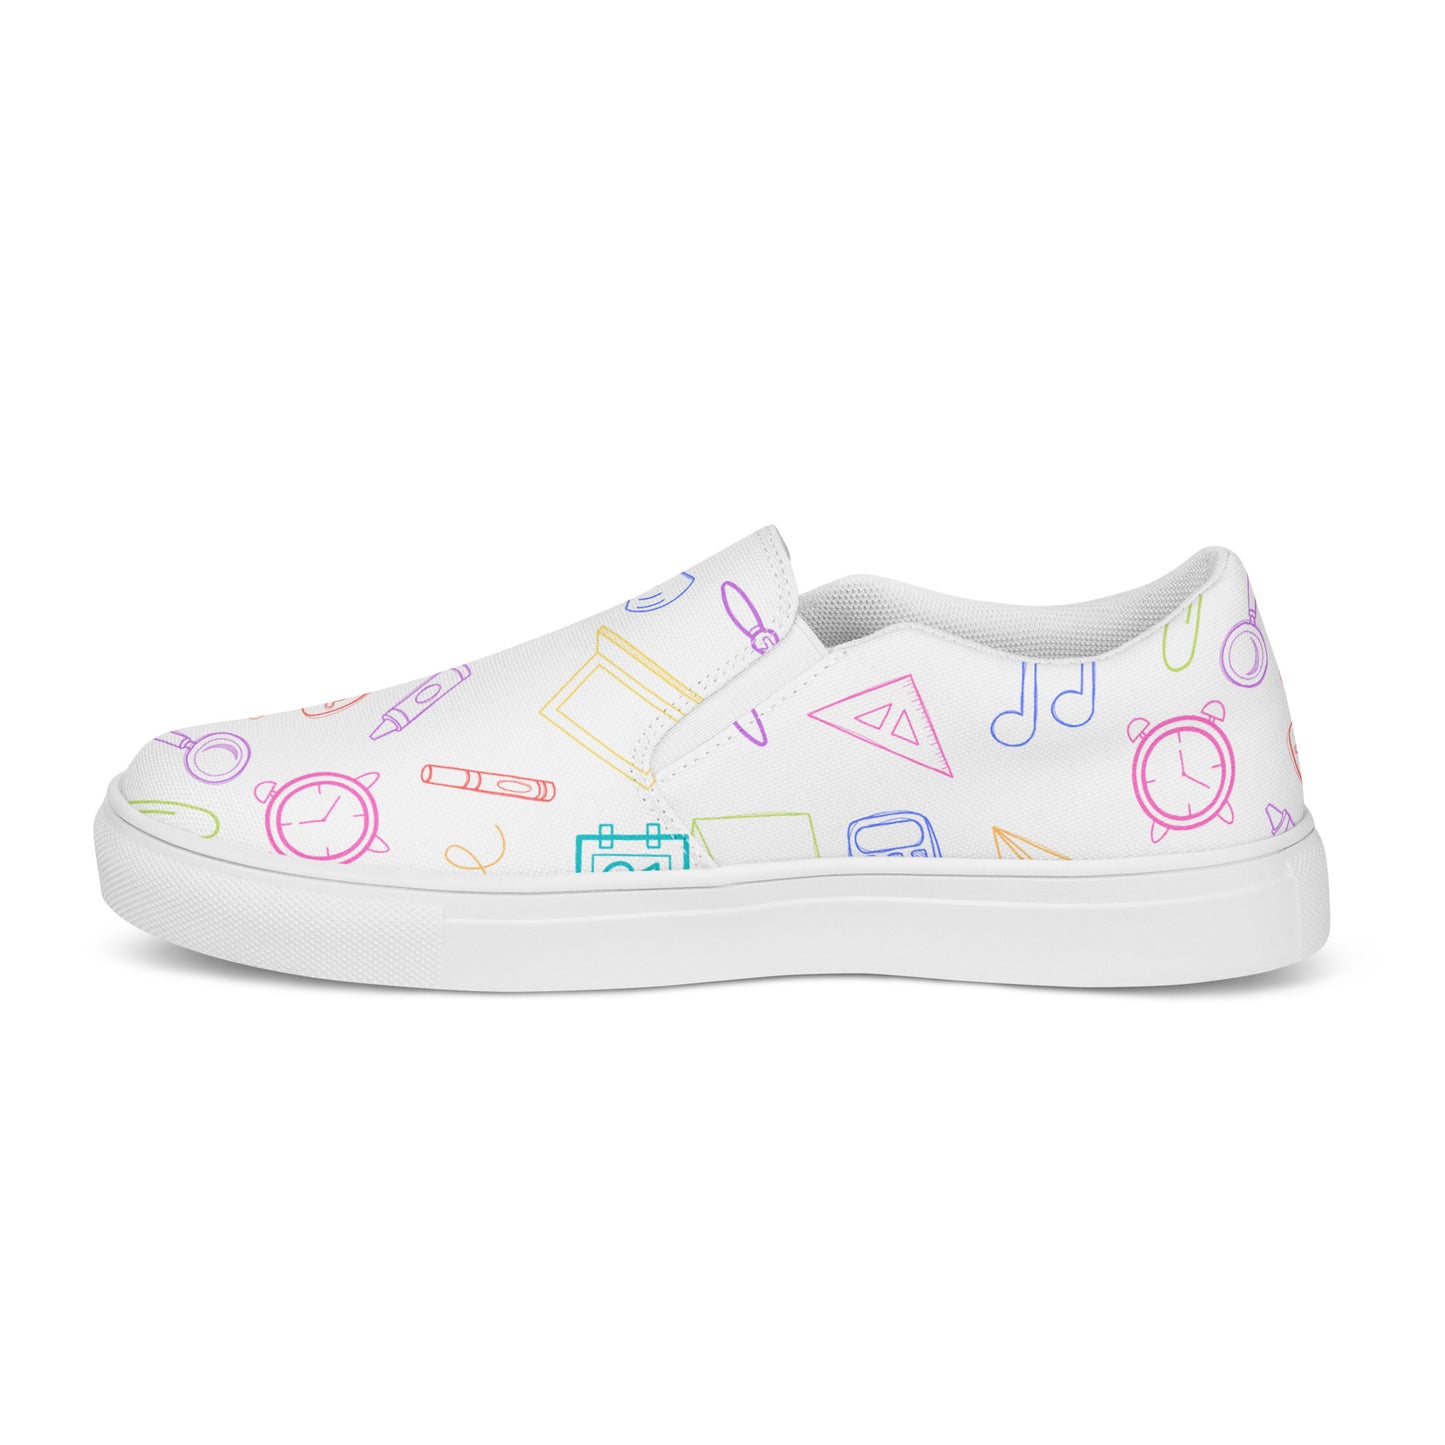 Bright Rainbow on White Elementary Doodles Slip-on Canvas Shoes (Women's Sizes)